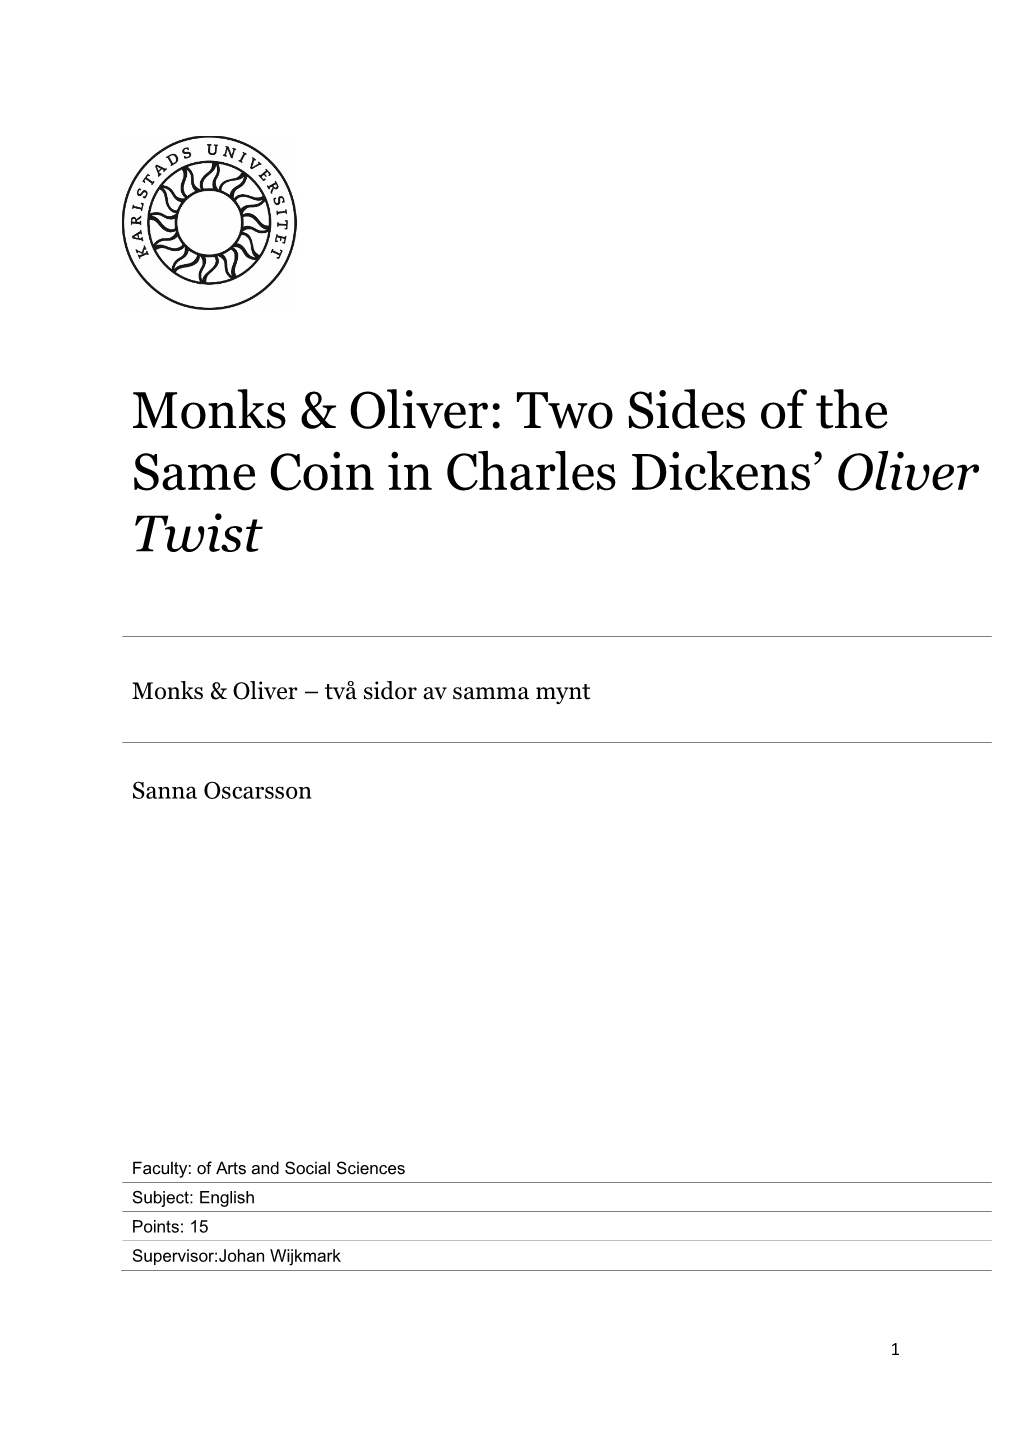 Two Sides of the Same Coin in Charles Dickens' Oliver Twist